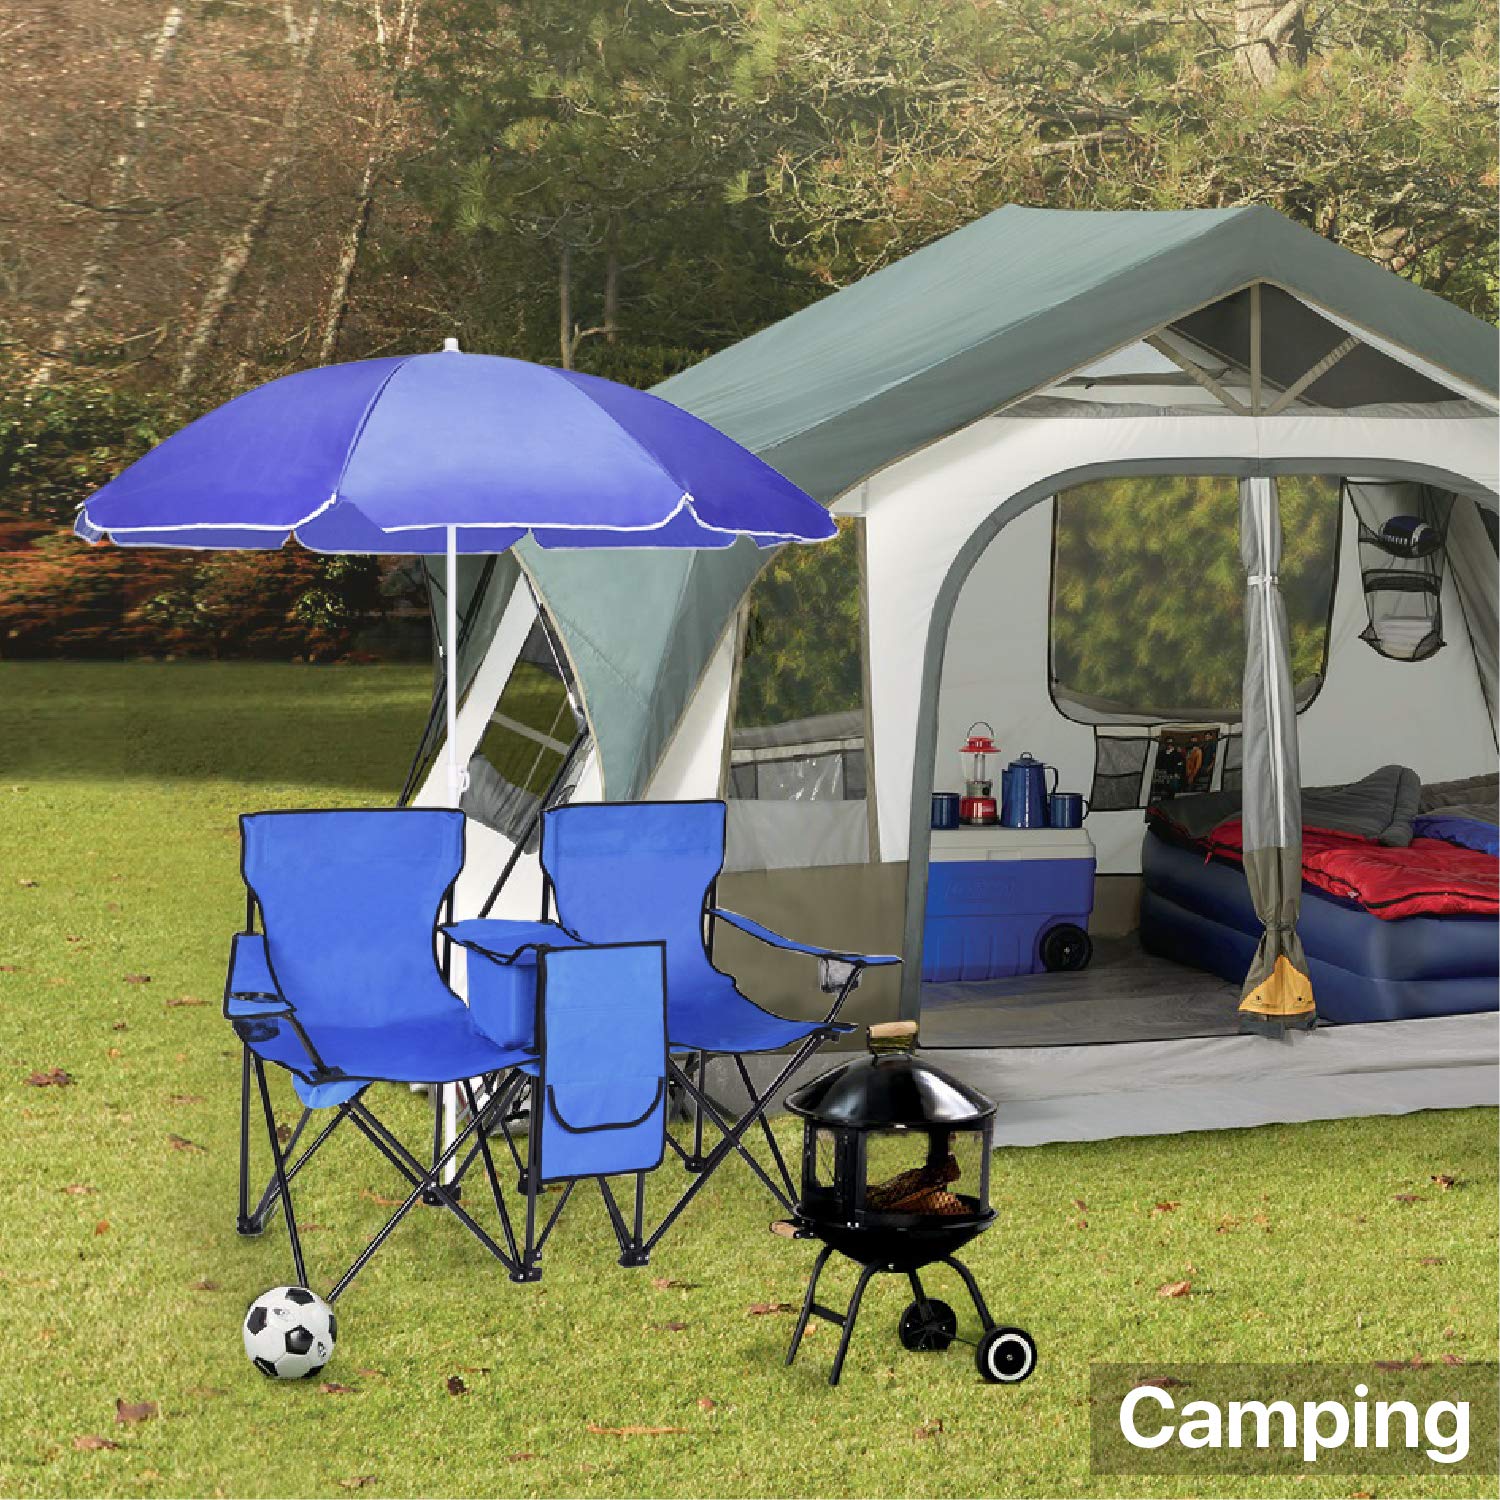 Urhomepro Folding New Camping Chairs with Umbrella Beverage Holder Blue, L3824 Polyester, Steel - image 3 of 9